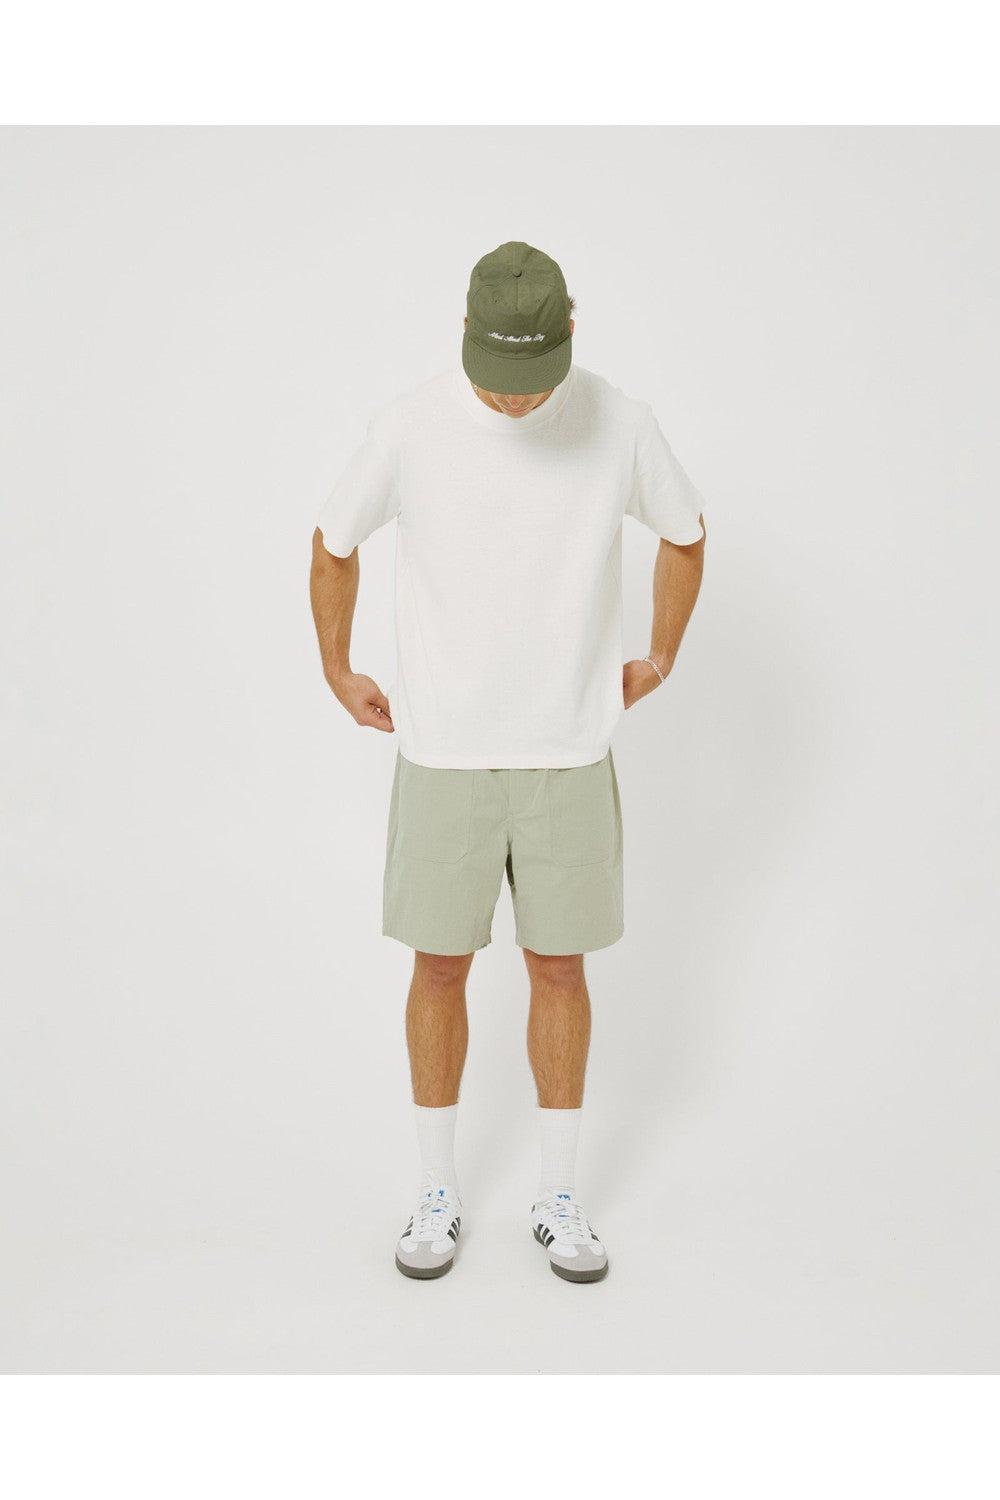 Commoners Utility Short - Sage | COMMONERS | Mad About The Boy